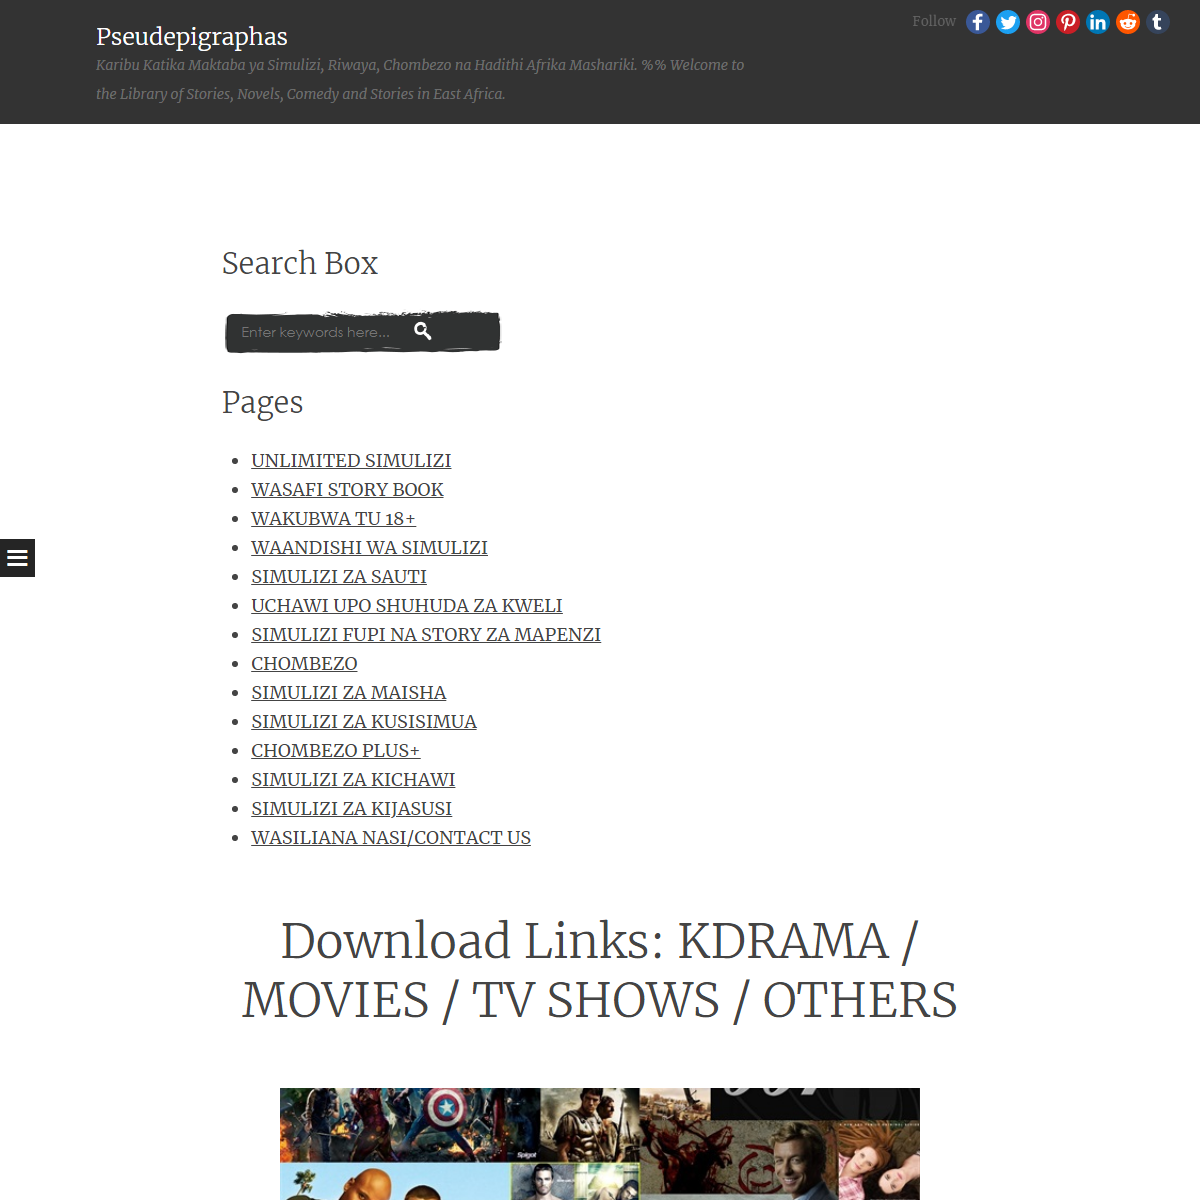 A complete backup of https://pseudepigraphas.blogspot.com/2019/11/download-links-kdrama-movies-tv-shows.html